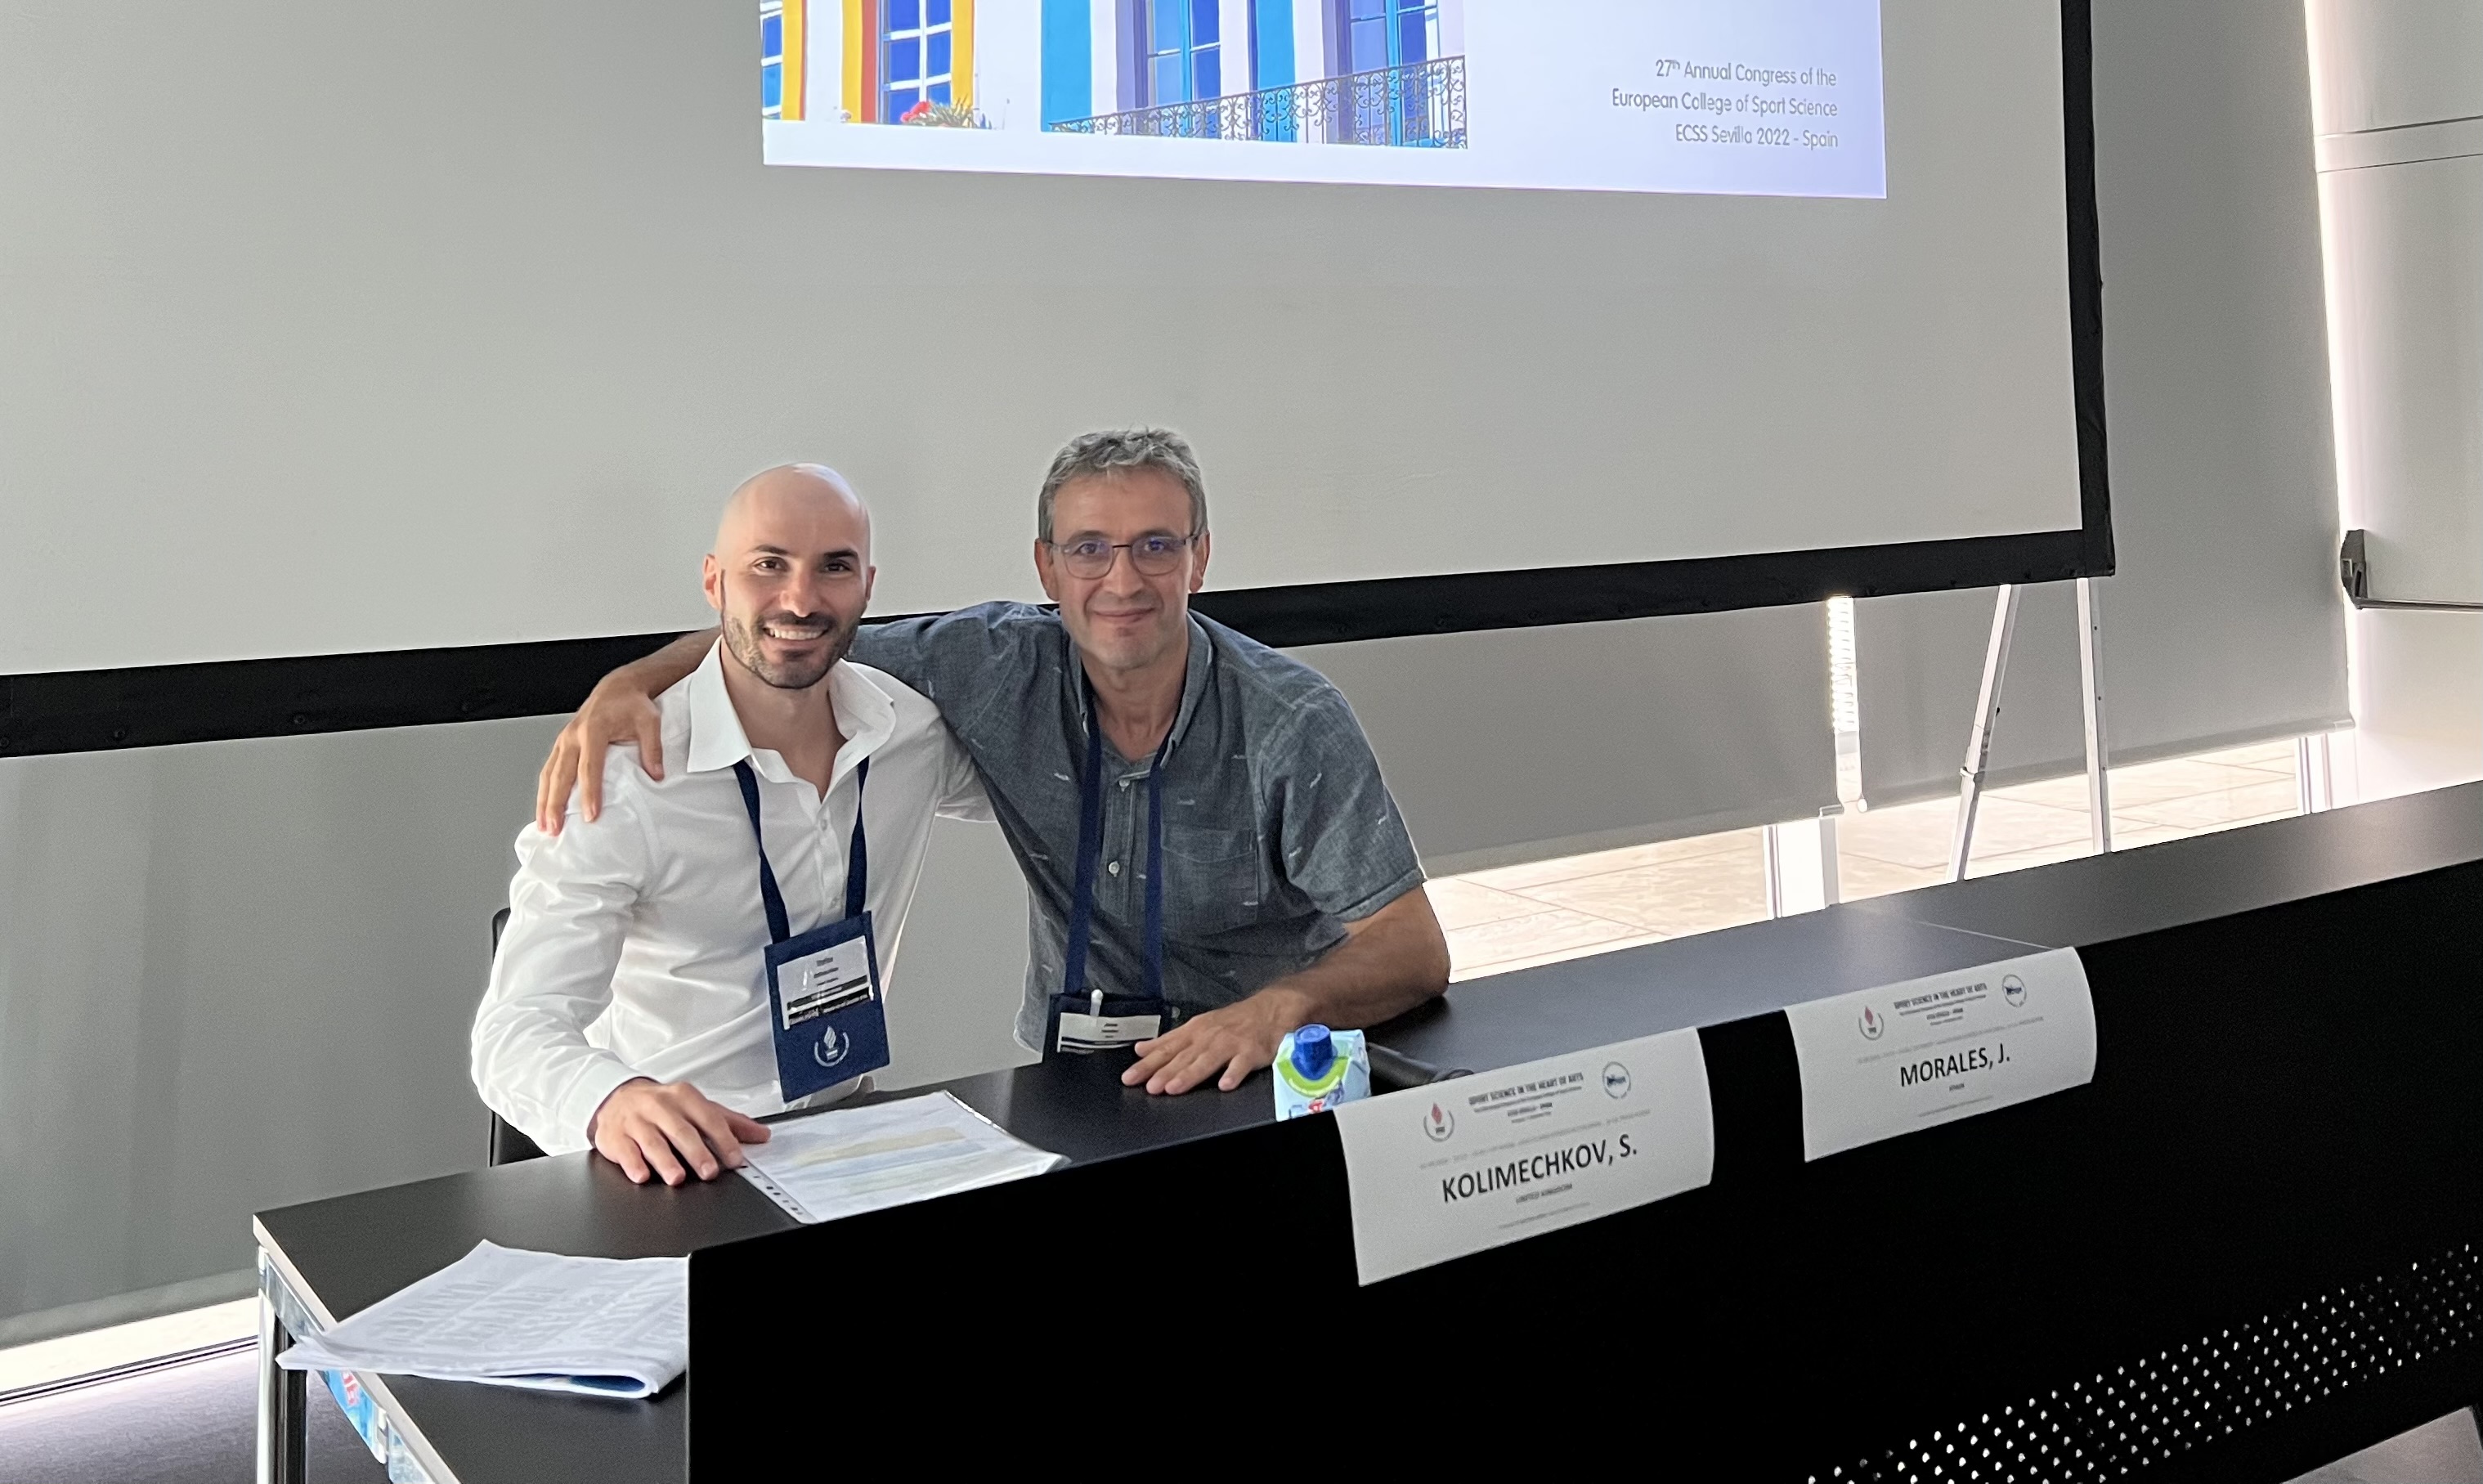 Dr Stefan Kolimechkov and Dr Morales chairing a session at the ECSS Congress 2022